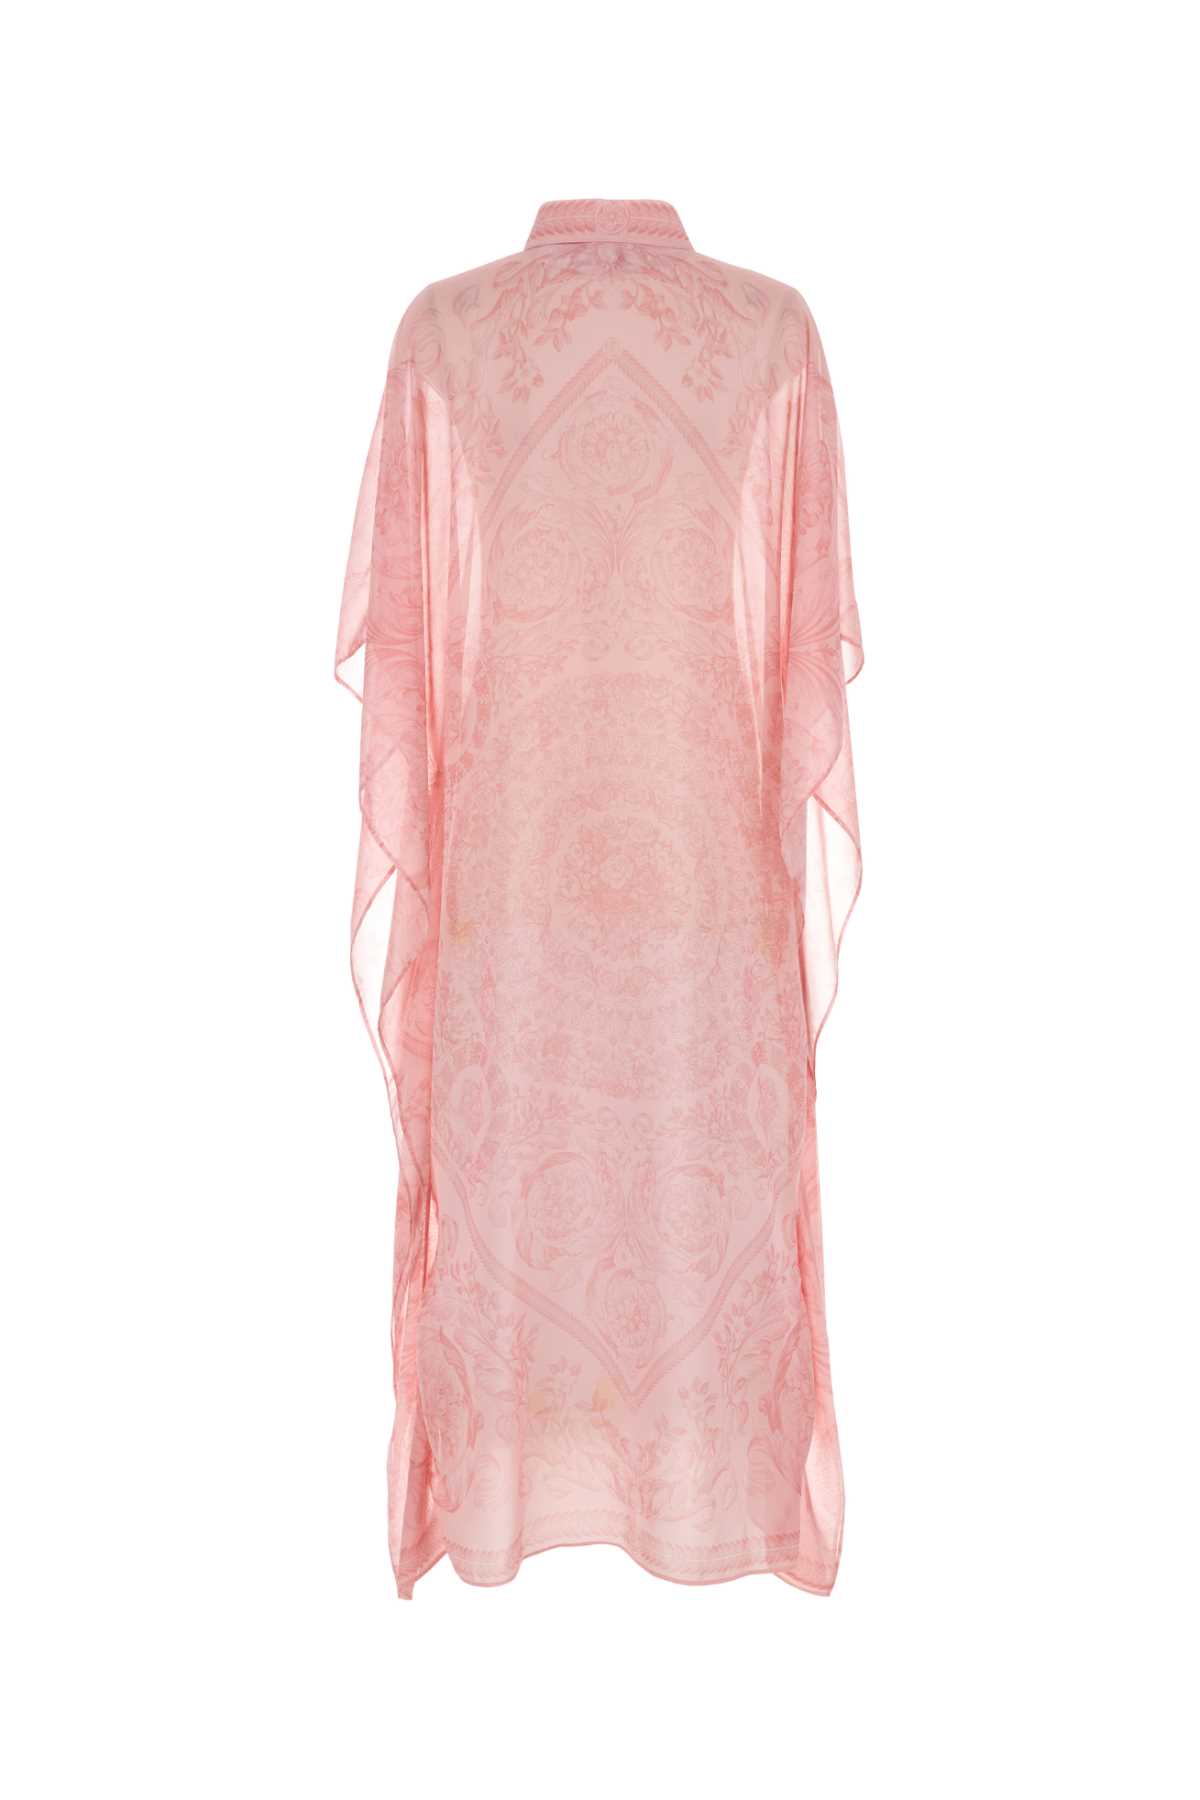 Versace Printed Chiffon Cover-up Dress In Palepink